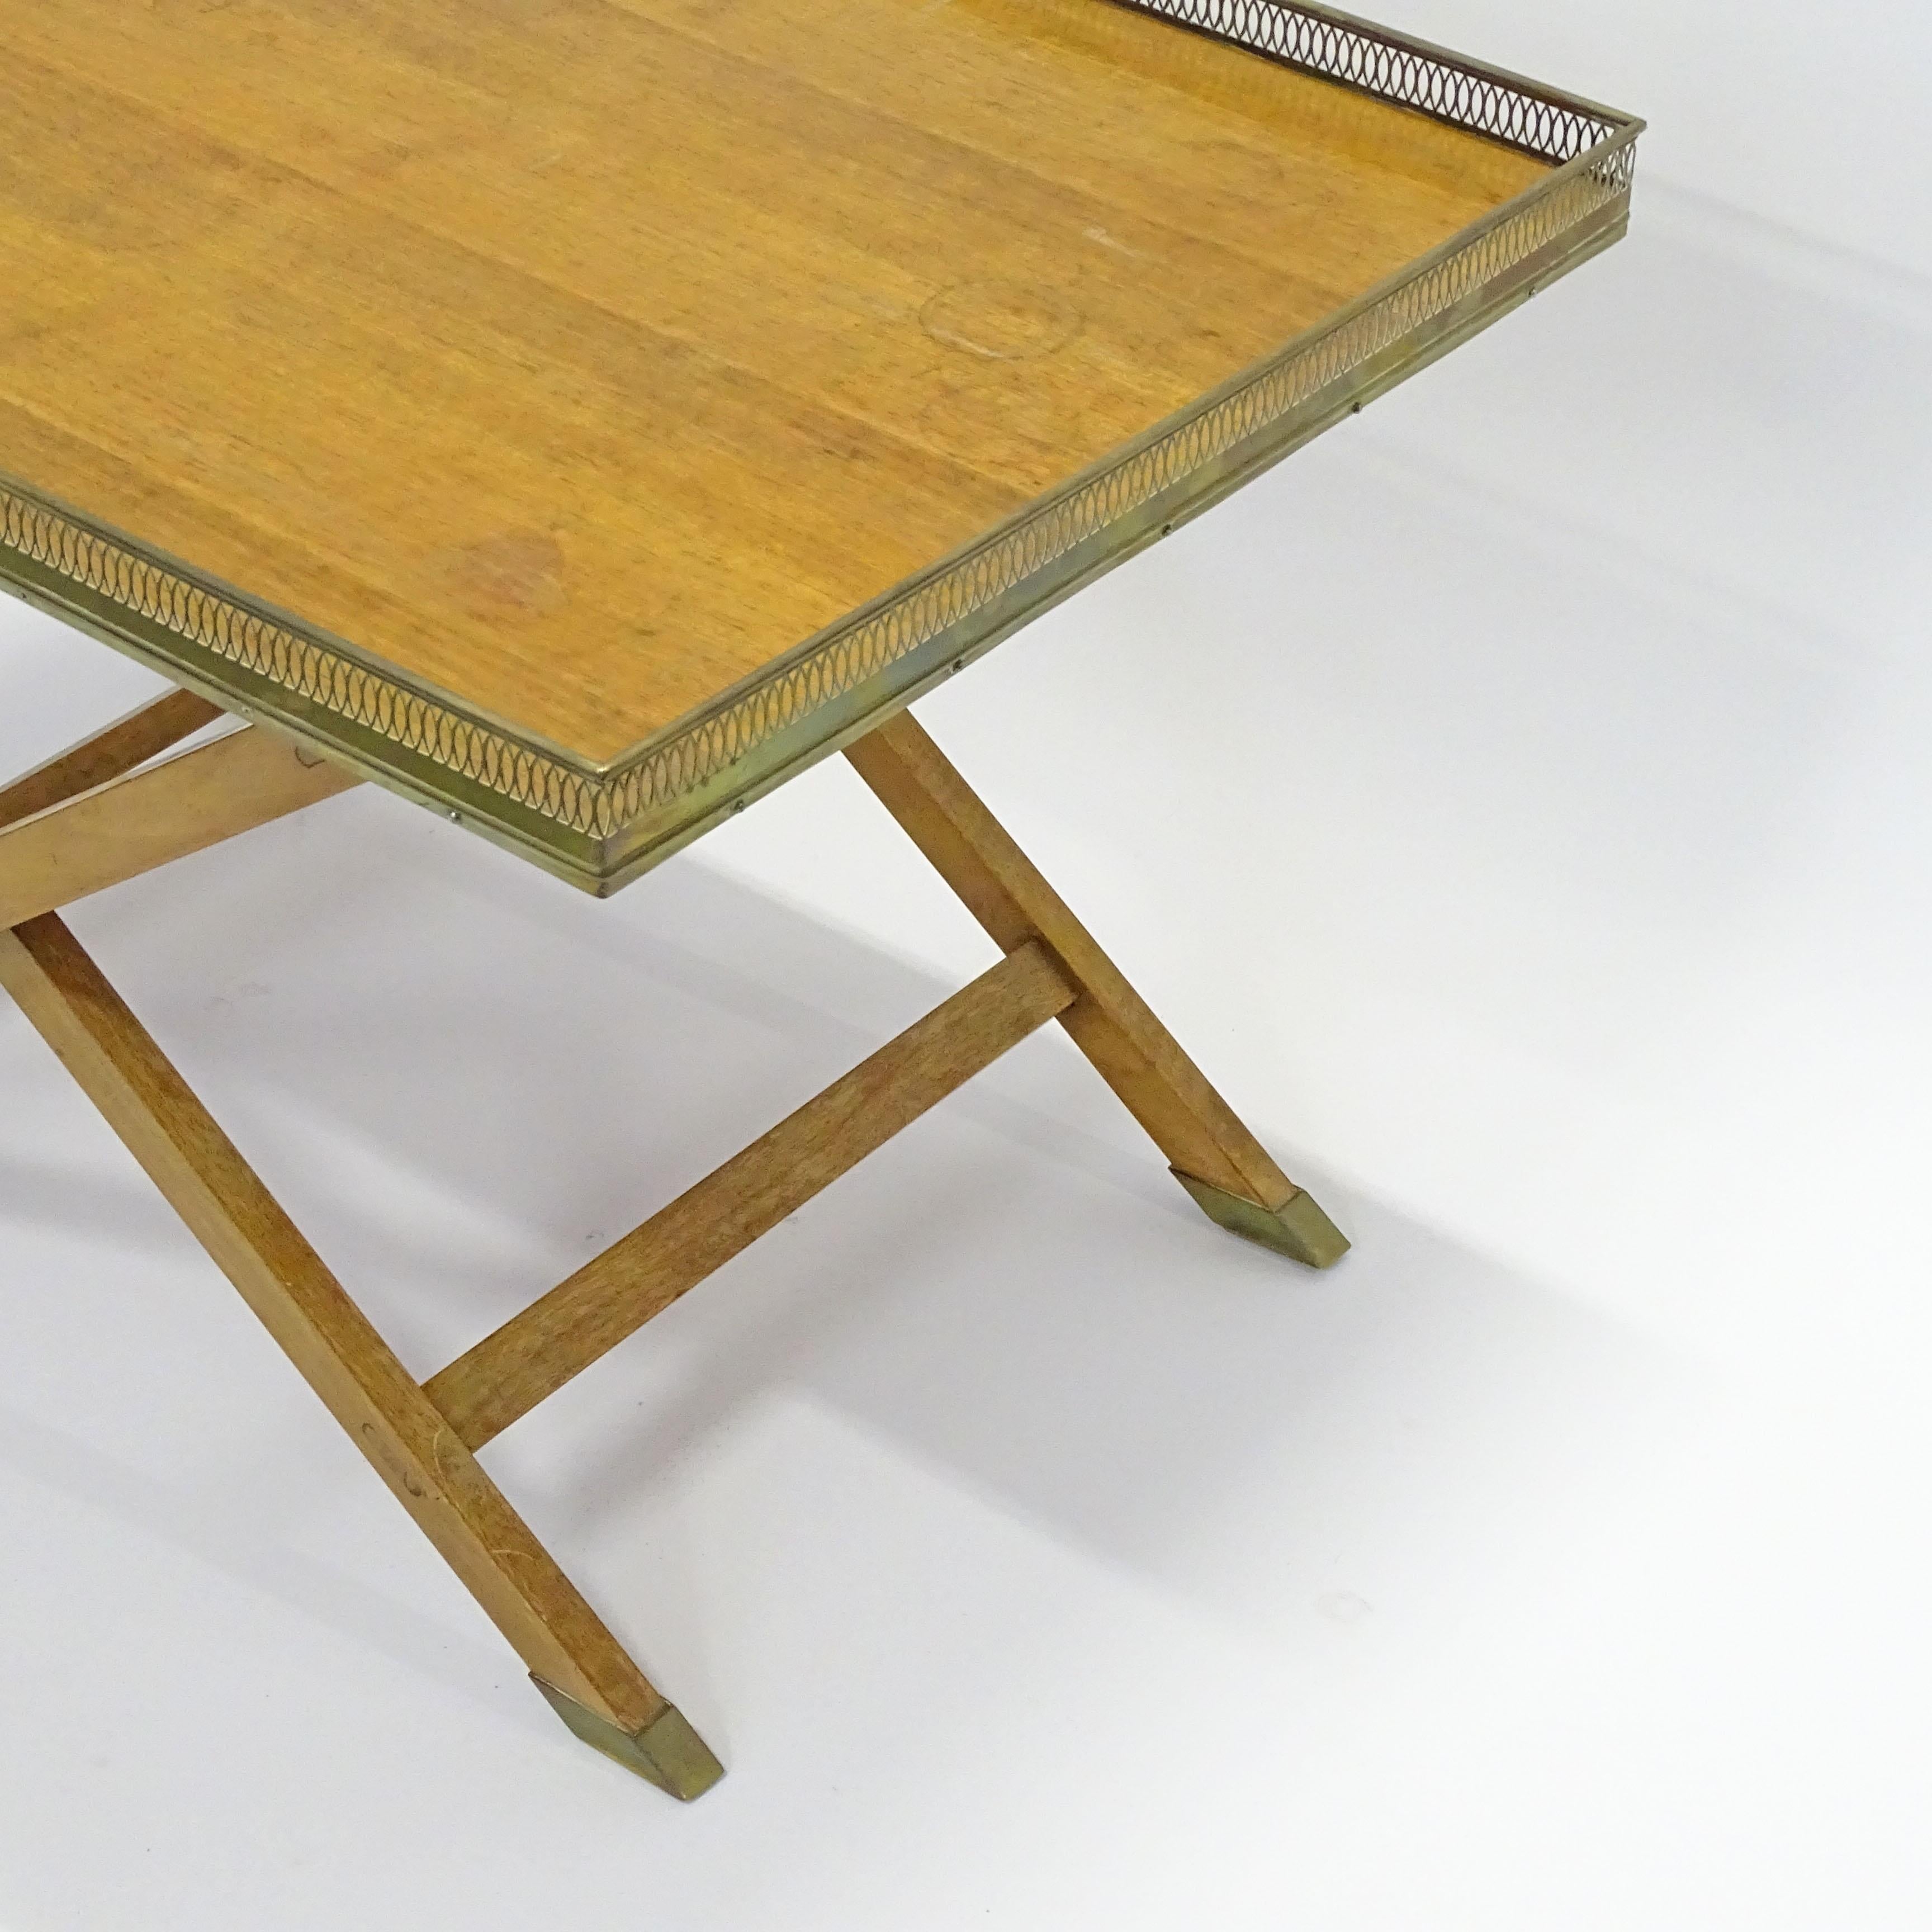 Mid-20th Century Splendid Wood and Brass Folding Coffee Table, 1950s For Sale